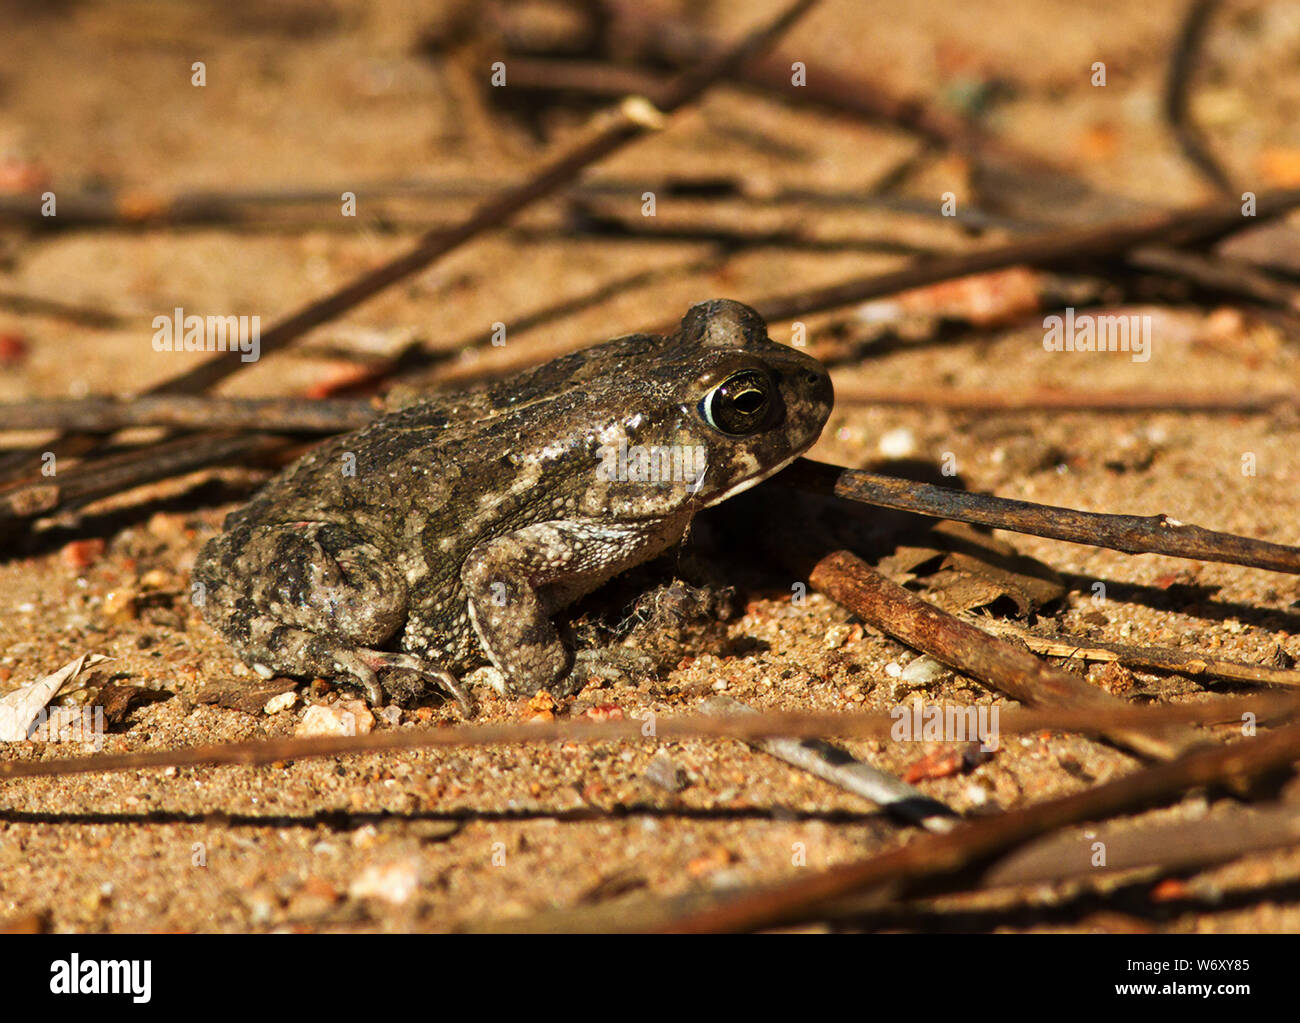 A small stocky amphibian with wart-like elevations, Knocking Sand Frog is found in temporary rain pools, pans and velis in savanna grasslands. Stock Photo